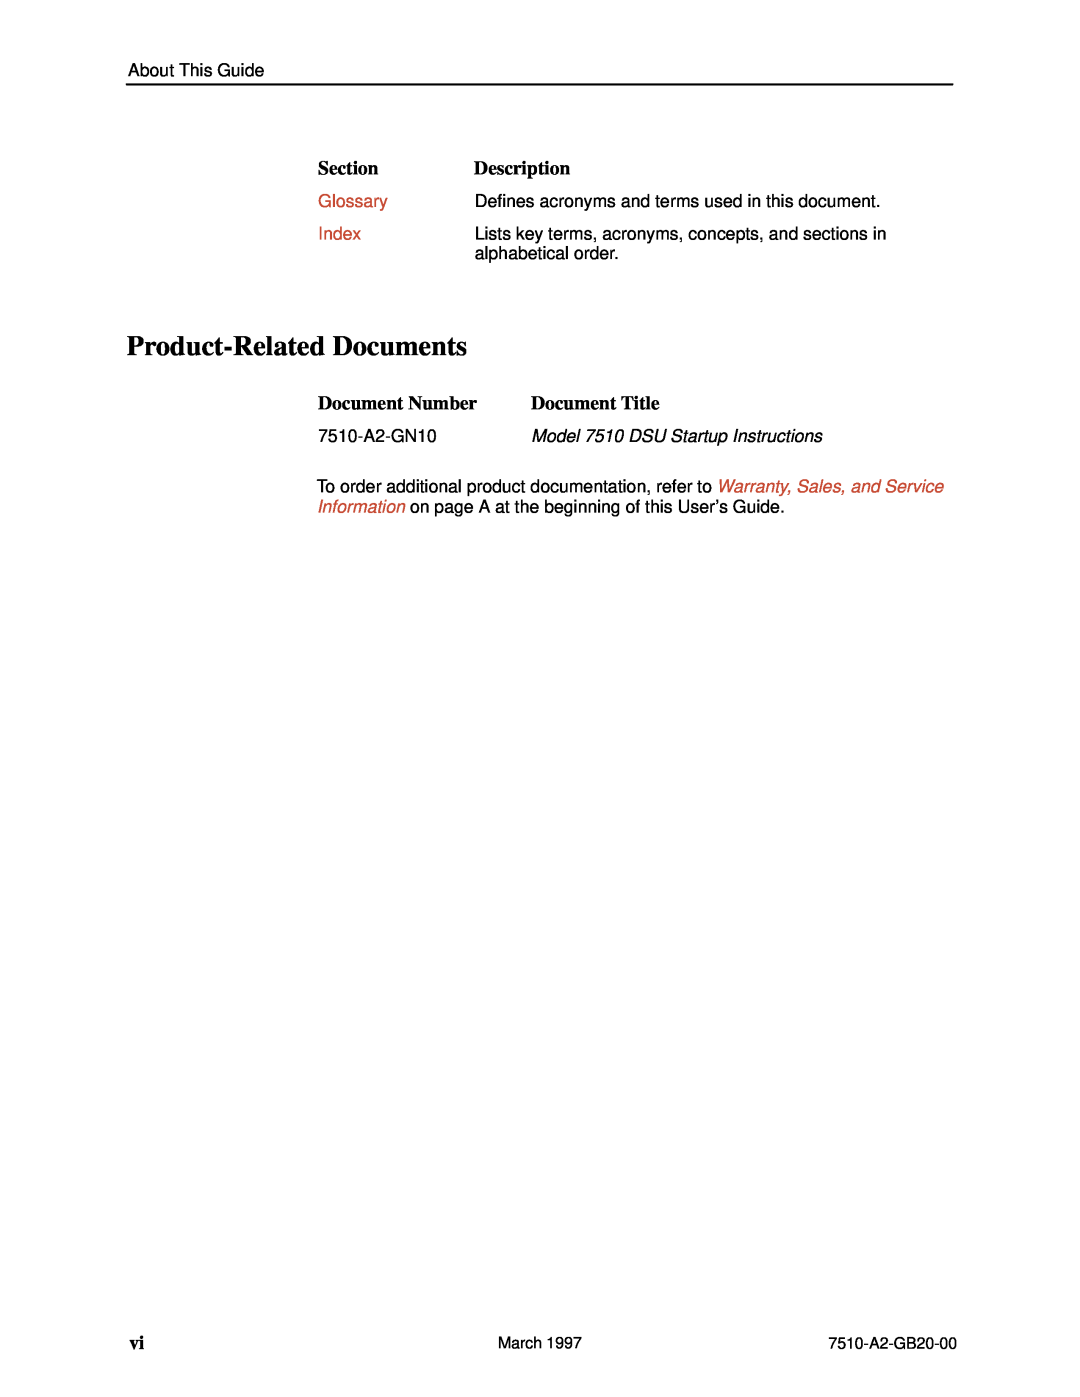 Paradyne 727 manual Product-RelatedDocuments, Section, Description, Document Number, Document Title, Glossary, Index 